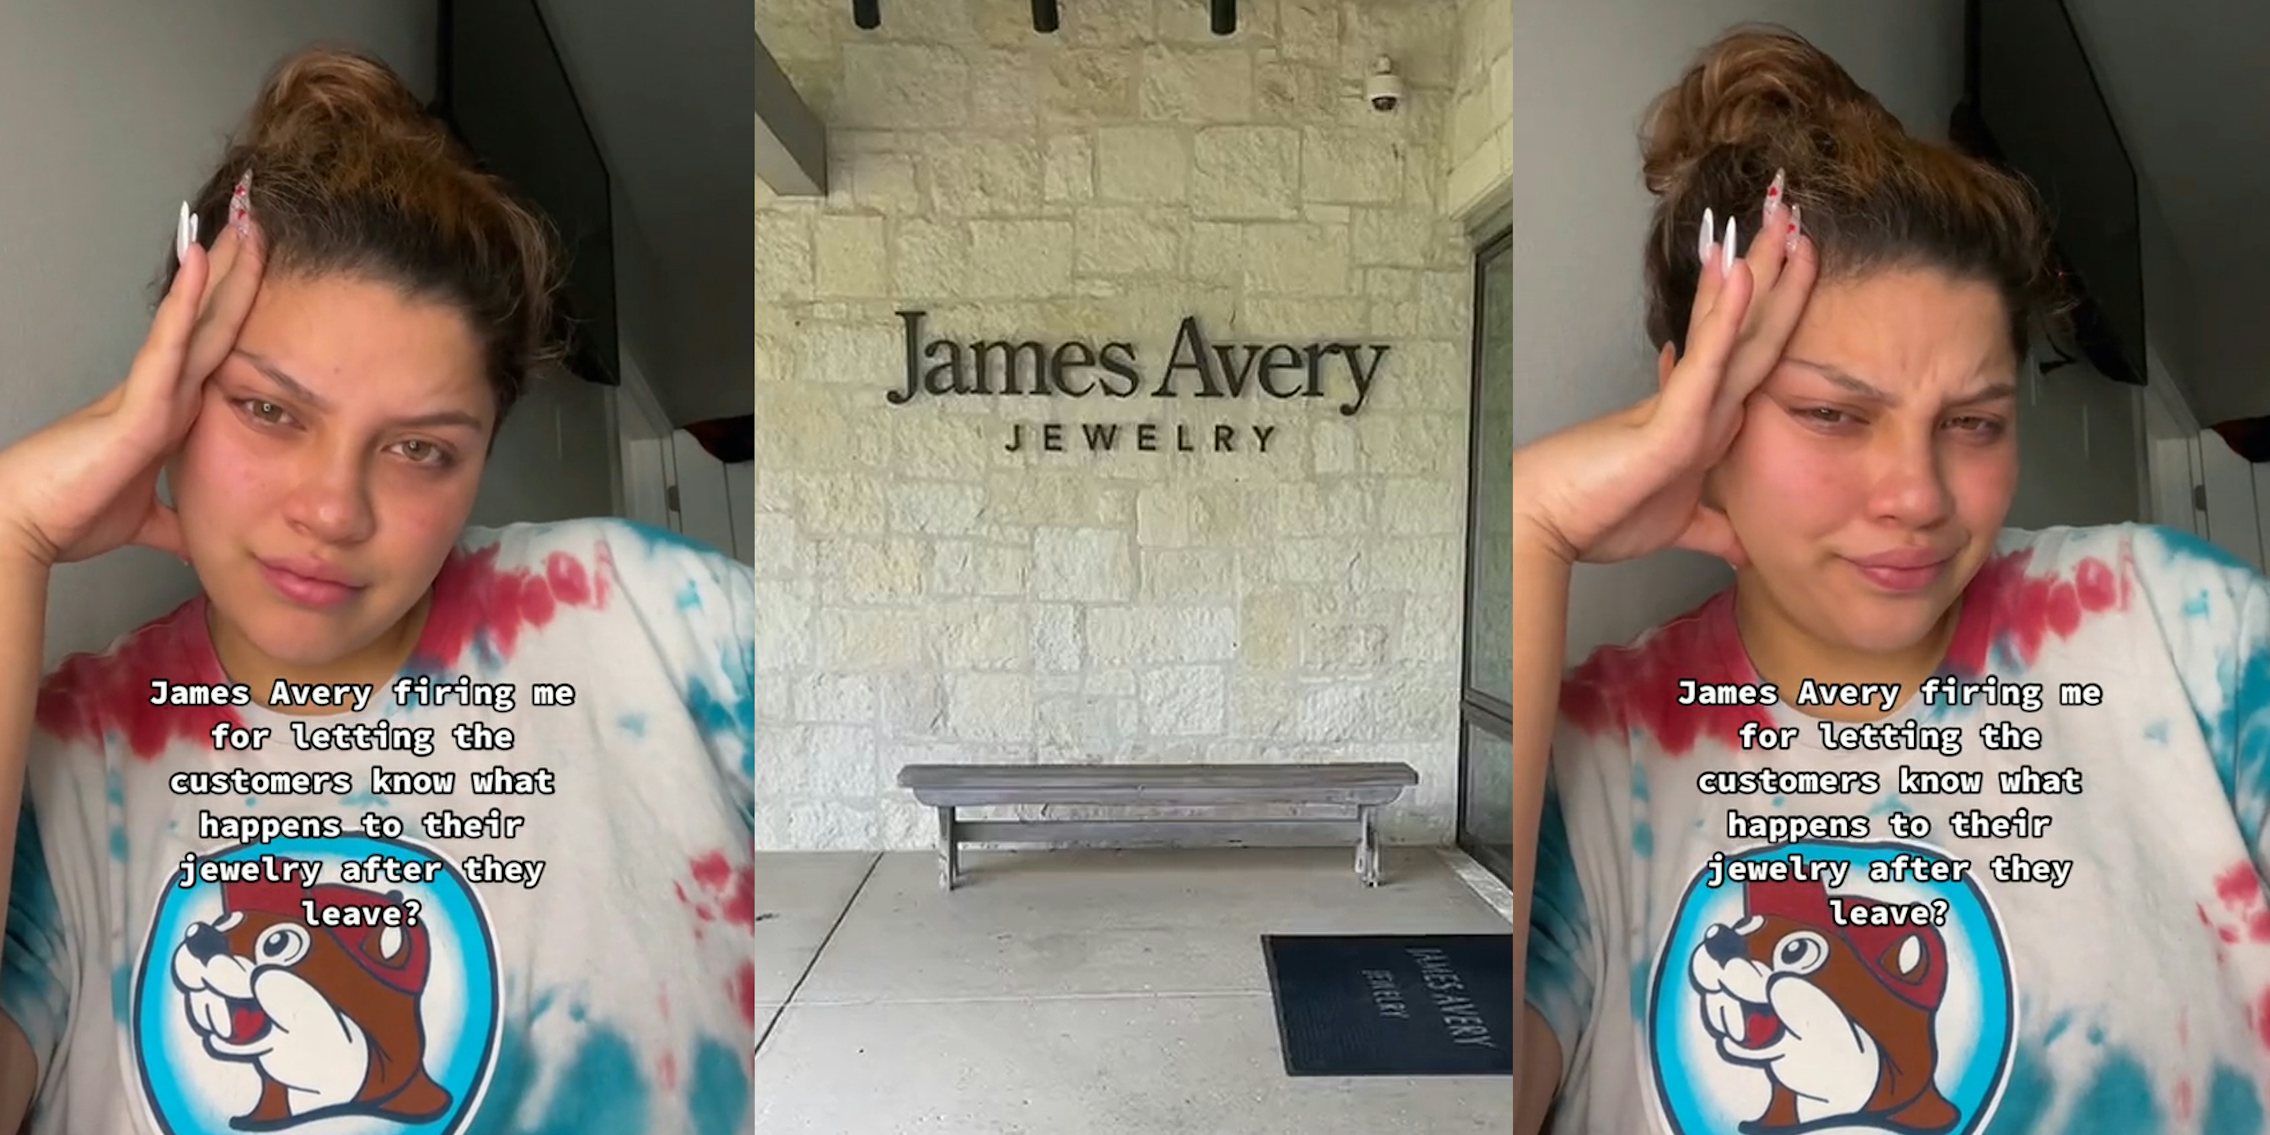 former James Avery employee with caption 'James Avery firing me for letting the customers know what happens to their jewelry after they leave?' (l) James Avery Jewelry entrance with sign (c) former James Avery employee with caption 'James Avery firing me for letting the customers know what happens to their jewelry after they leave?' (r)